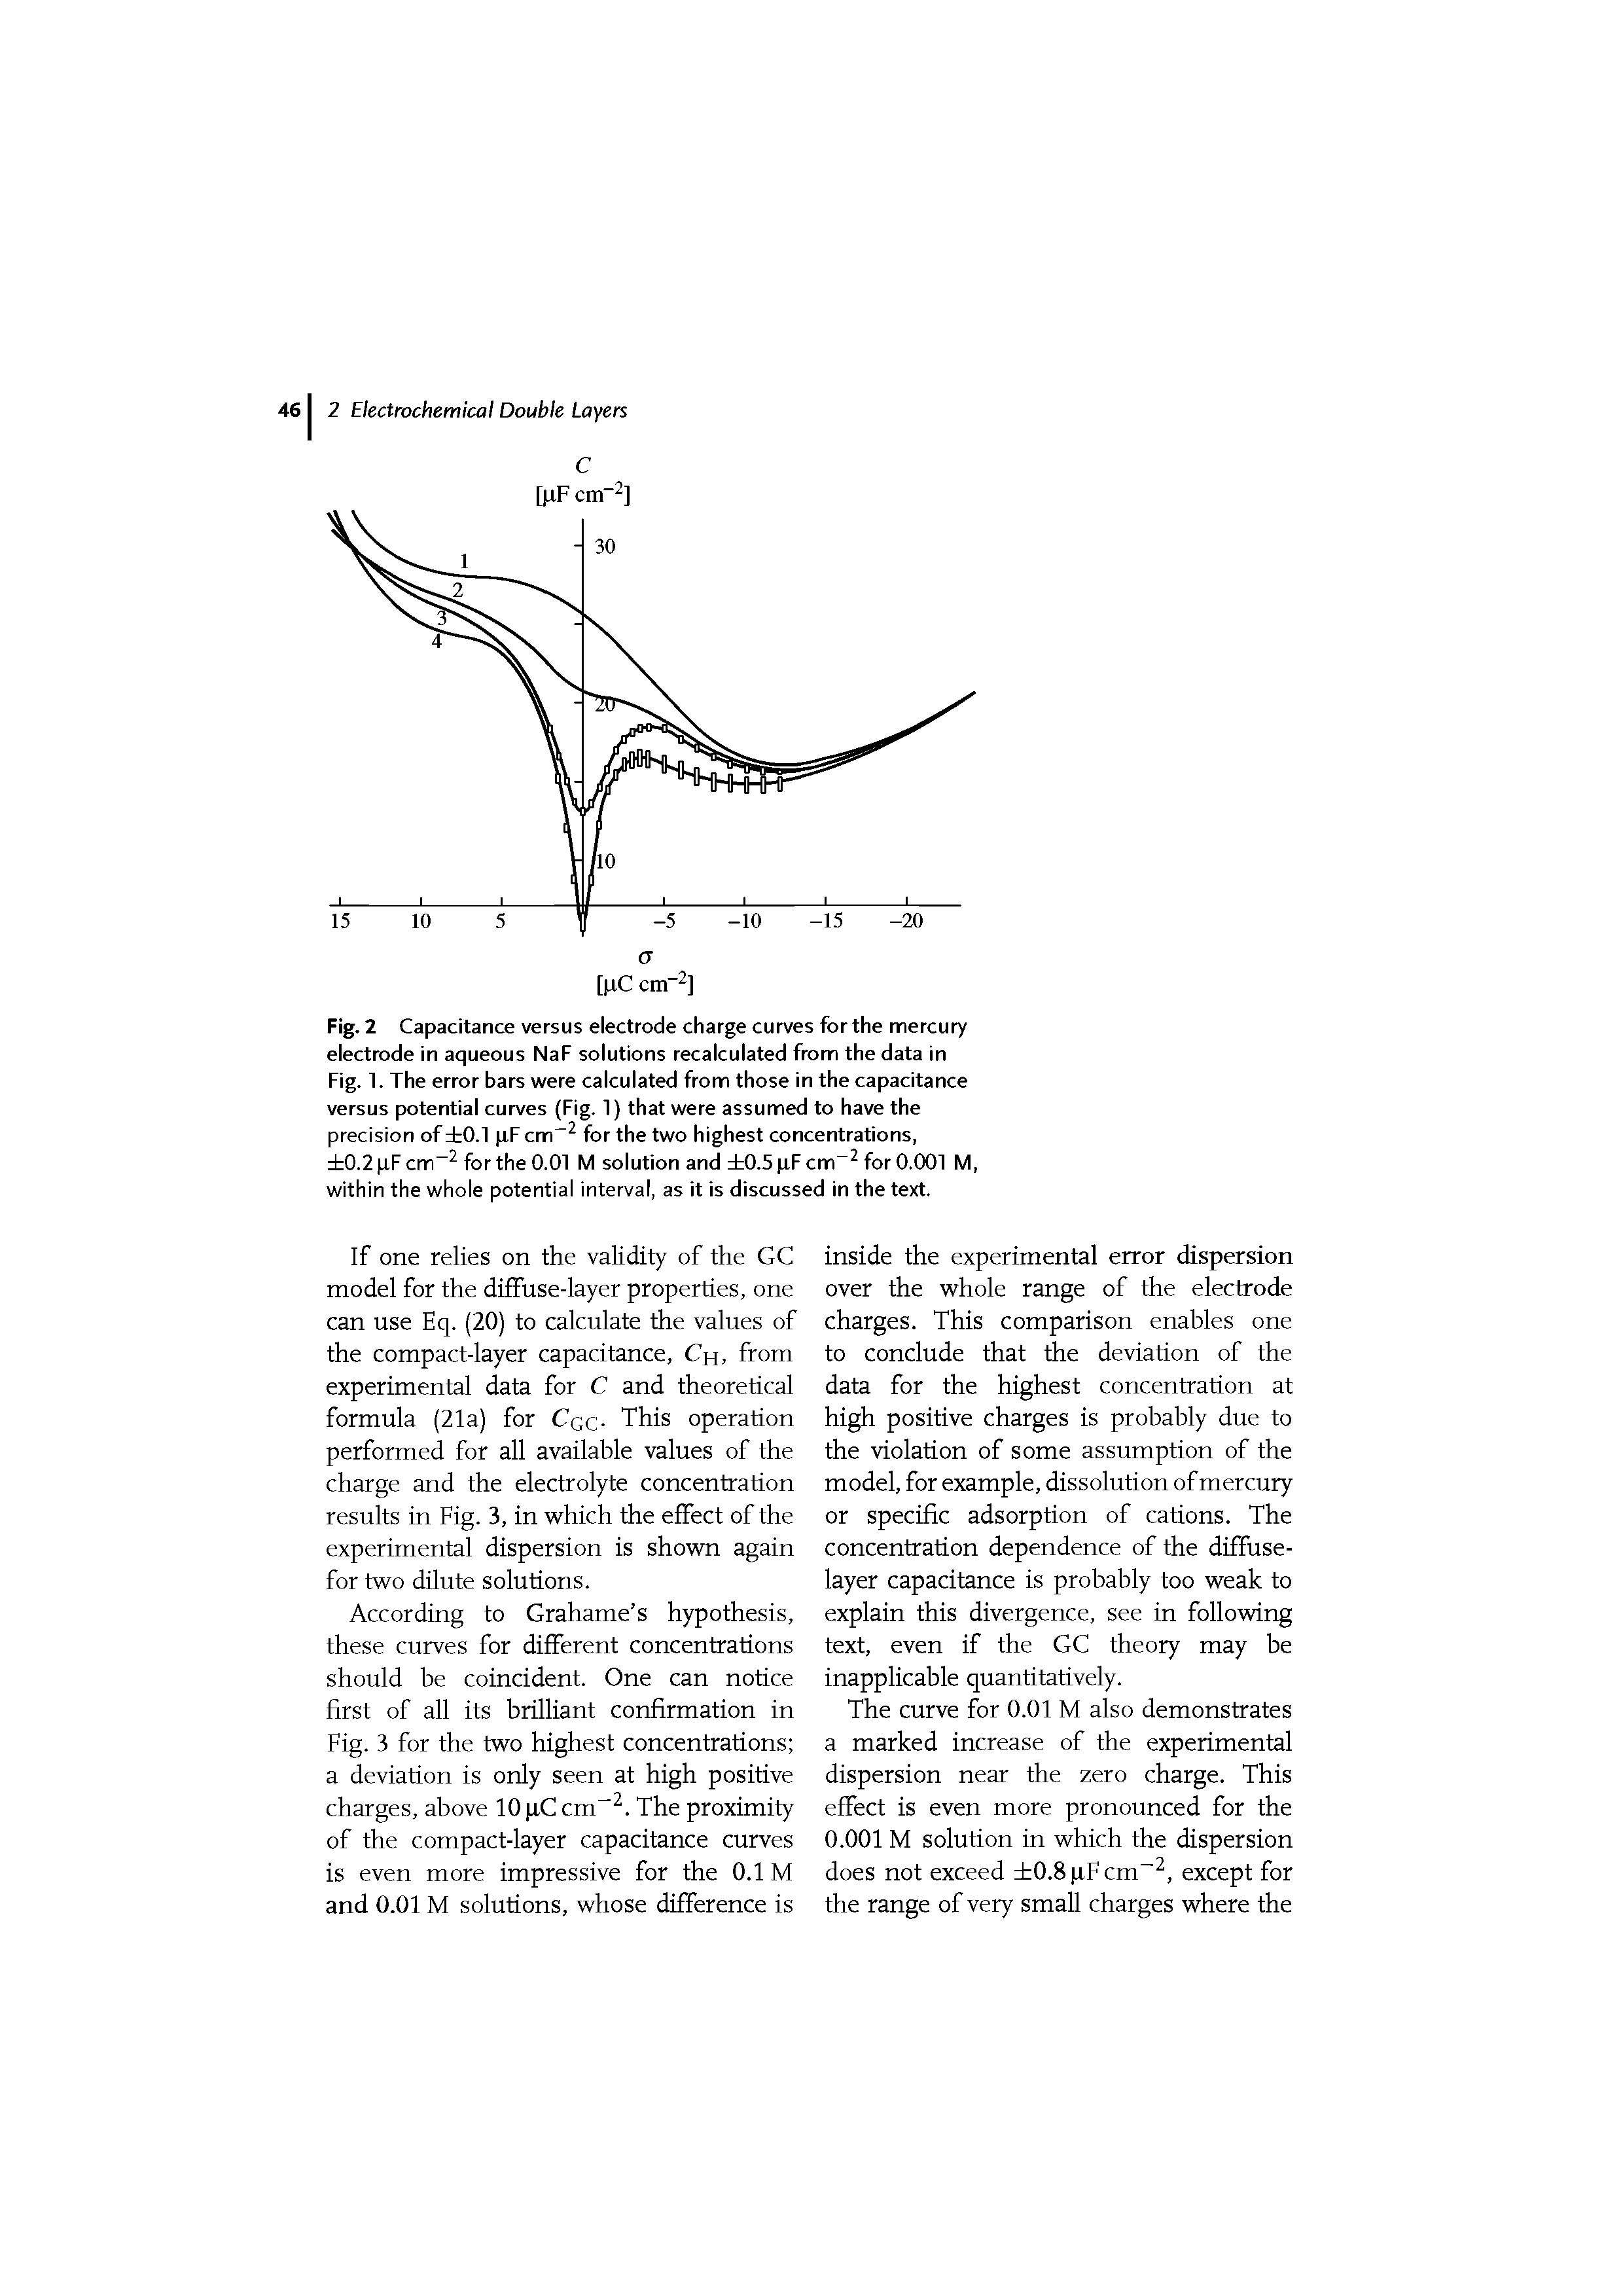 Fig. 2 Capacitance versus electrode charge curves for the mercury electrode in aqueous NaF solutions recalculated from the data in Fig. 1. The error bars were calculated from those in the capacitance versus potential curves (Fig. 1) that were assumed to have the precision of 0.1 pF cm for the two highest concentrations,...